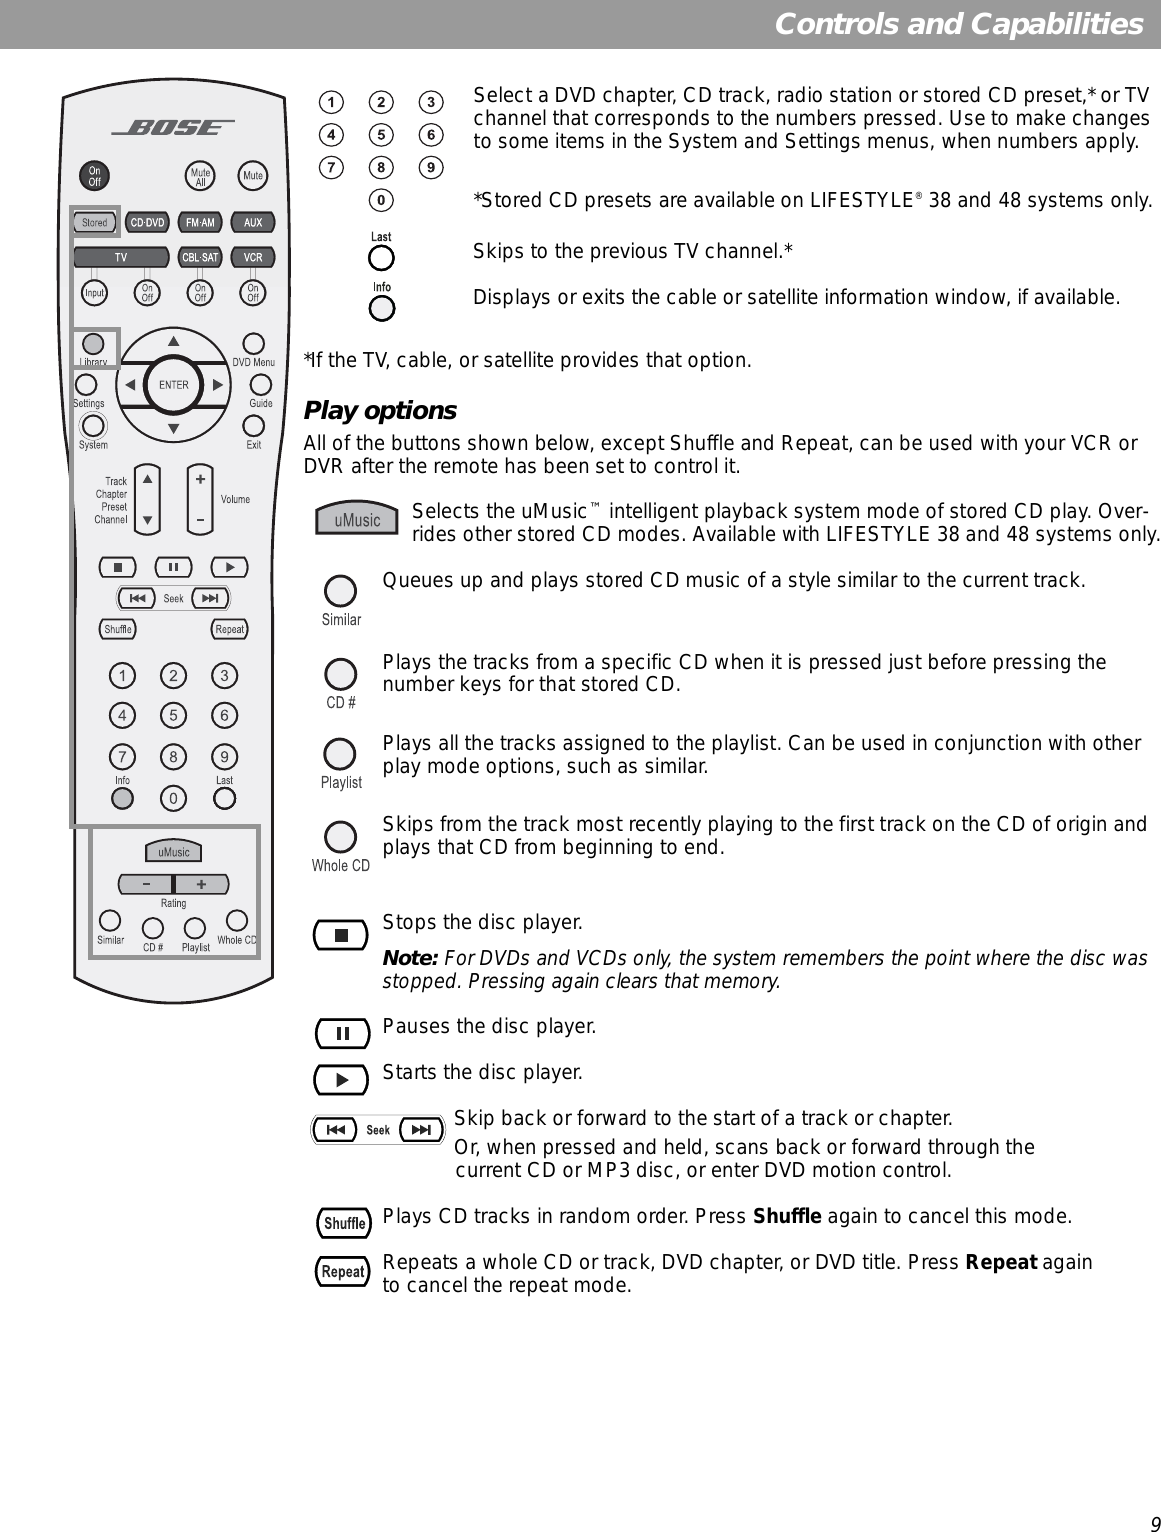 9Controls and Capabilities*If the TV, cable, or satellite provides that option.Play optionsAll of the buttons shown below, except Shuffle and Repeat, can be used with your VCR or DVR after the remote has been set to control it.Select a DVD chapter, CD track, radio station or stored CD preset,* or TV channel that corresponds to the numbers pressed. Use to make changes to some items in the System and Settings menus, when numbers apply.*Stored CD presets are available on LIFESTYLE® 38 and 48 systems only.Skips to the previous TV channel.*Displays or exits the cable or satellite information window, if available. Selects the uMusic™ intelligent playback system mode of stored CD play. Over-rides other stored CD modes. Available with LIFESTYLE 38 and 48 systems only.Queues up and plays stored CD music of a style similar to the current track.Plays the tracks from a specific CD when it is pressed just before pressing the  number keys for that stored CD.Plays all the tracks assigned to the playlist. Can be used in conjunction with other play mode options, such as similar.Skips from the track most recently playing to the first track on the CD of origin and plays that CD from beginning to end. Stops the disc player. Note: For DVDs and VCDs only, the system remembers the point where the disc was stopped. Pressing again clears that memory.Pauses the disc player. Starts the disc player.Skip back or forward to the start of a track or chapter. Or, when pressed and held, scans back or forward through the  current CD or MP3 disc, or enter DVD motion control. Plays CD tracks in random order. Press Shuffle again to cancel this mode.Repeats a whole CD or track, DVD chapter, or DVD title. Press Repeat again  to cancel the repeat mode.